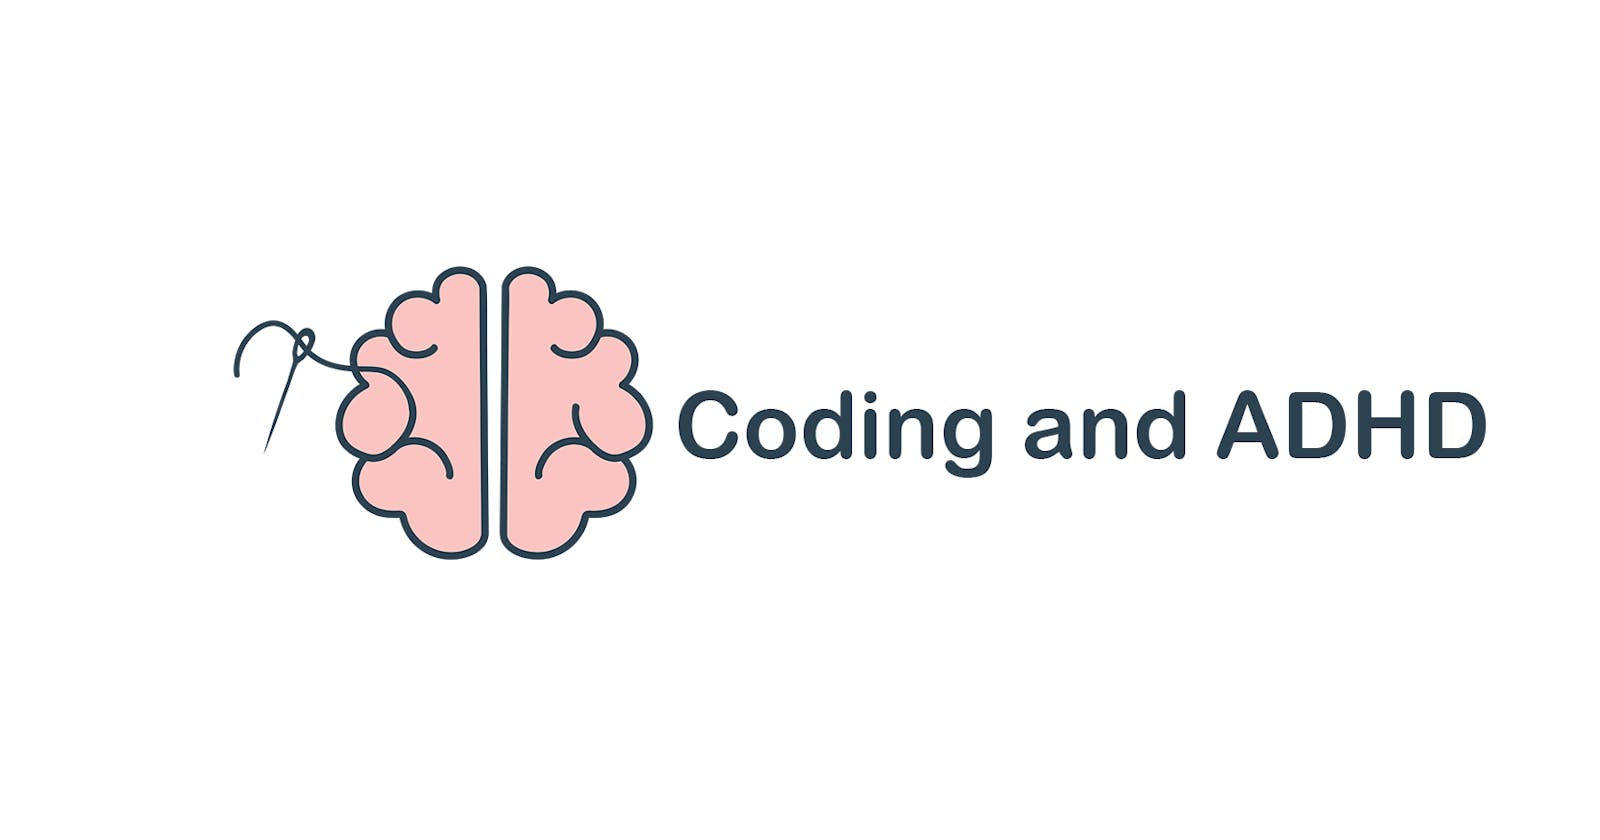 Coding and ADHD - Can't Stop